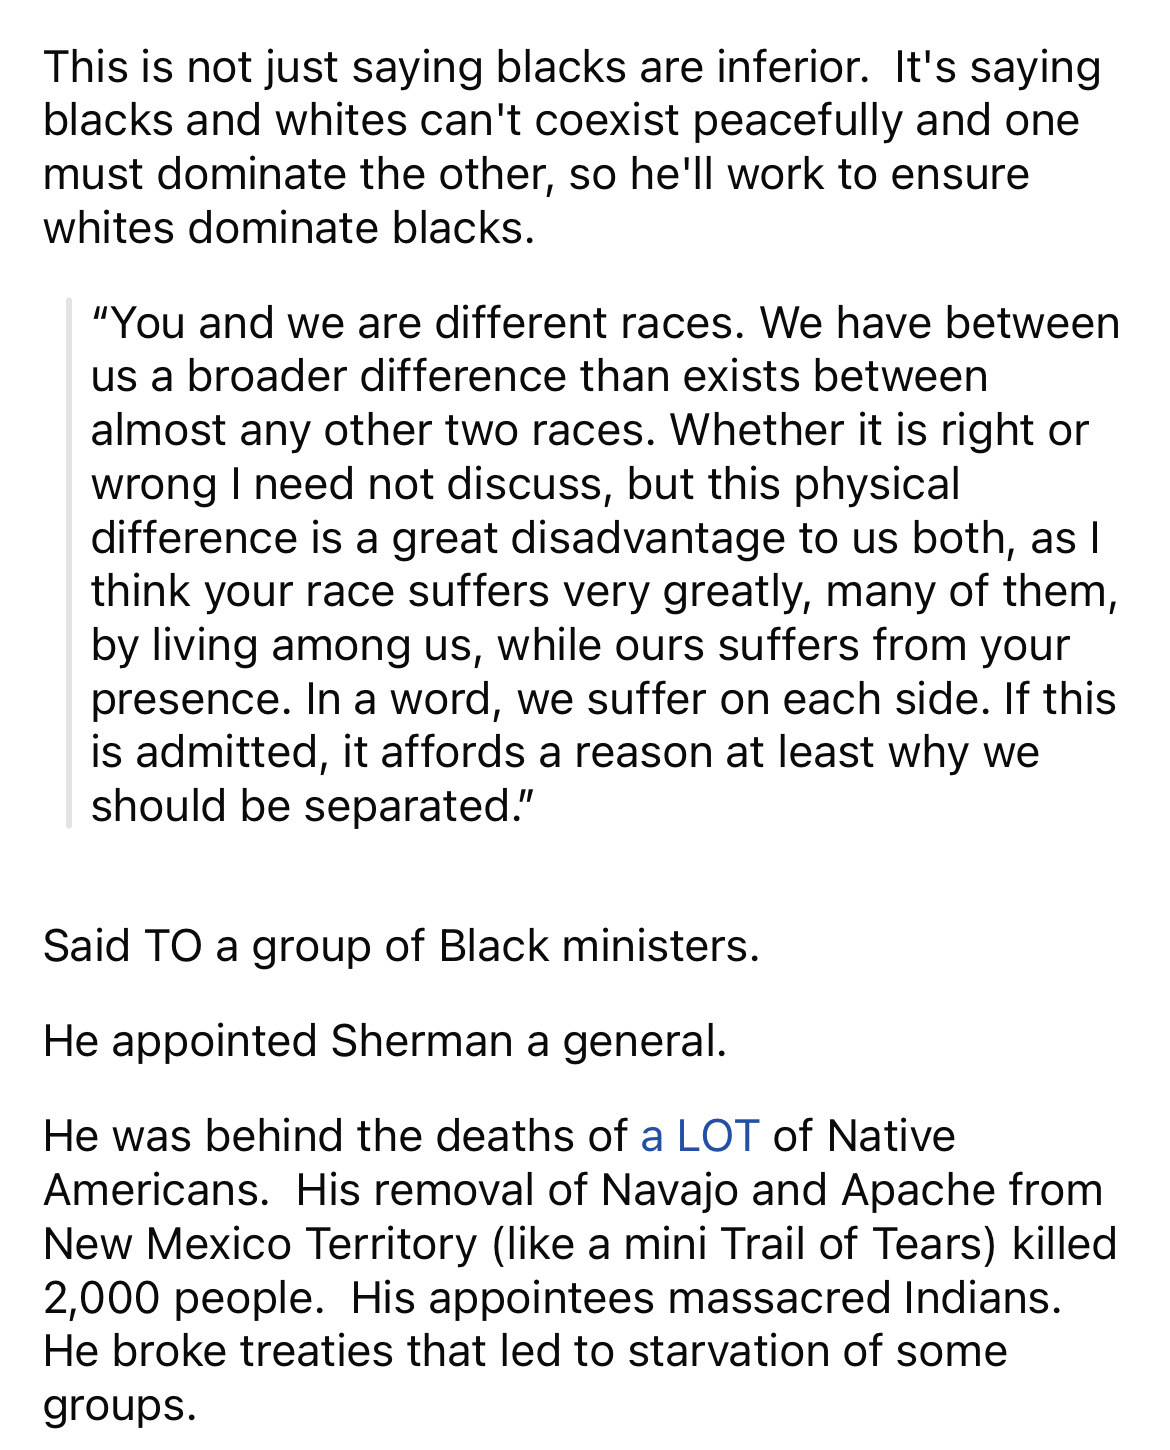 document - This is not just saying blacks are inferior. It's saying blacks and whites can't coexist peacefully and one must dominate the other, so he'll work to ensure whites dominate blacks. "You and we are different races. We have between us a broader d